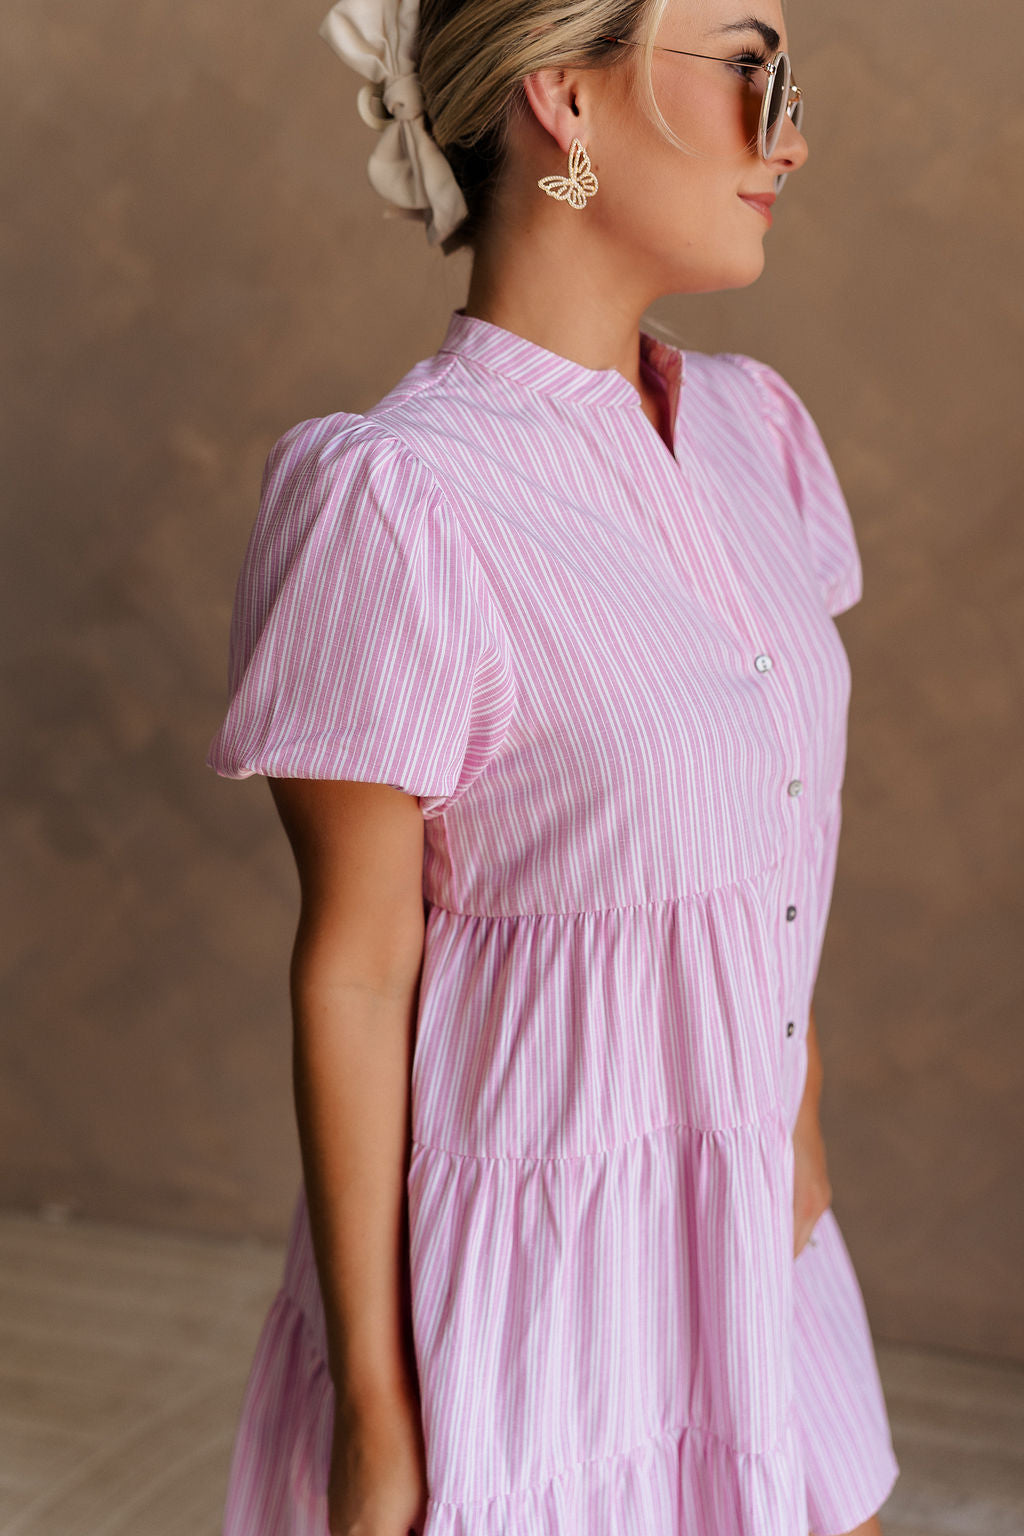 Upper body side view of female model wearing the Cameron Pink & White Striped Dress that has pink and white vertical striped fabric, short puff sleeves, a tiered skirt, and button up front.